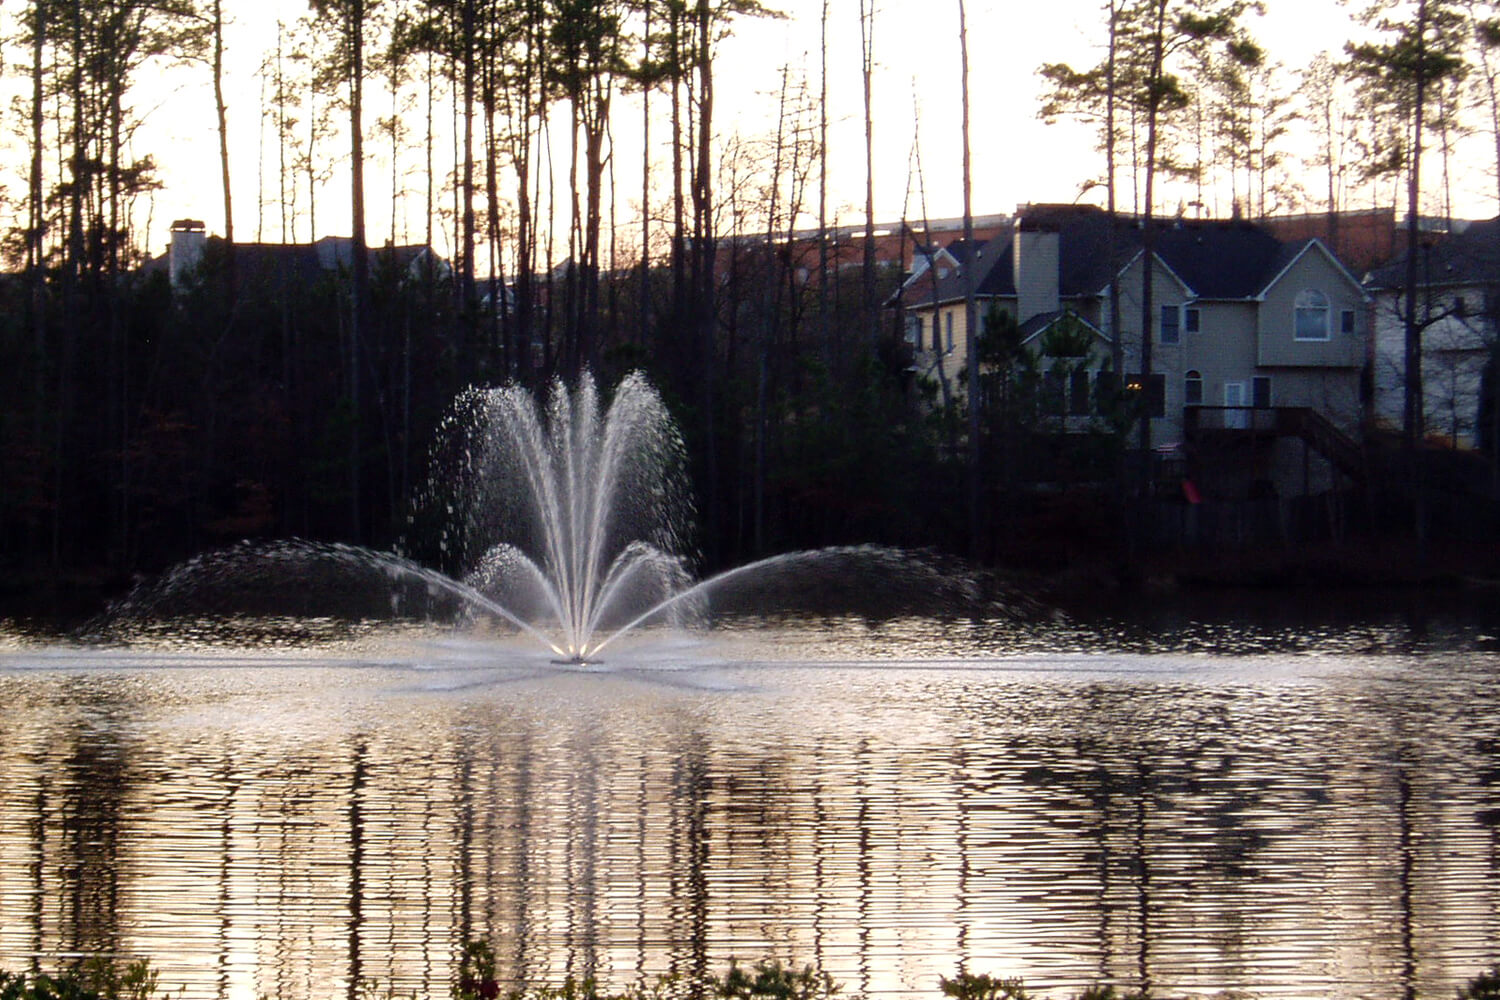 One of Otterbine's Genesis Aerating Fountains